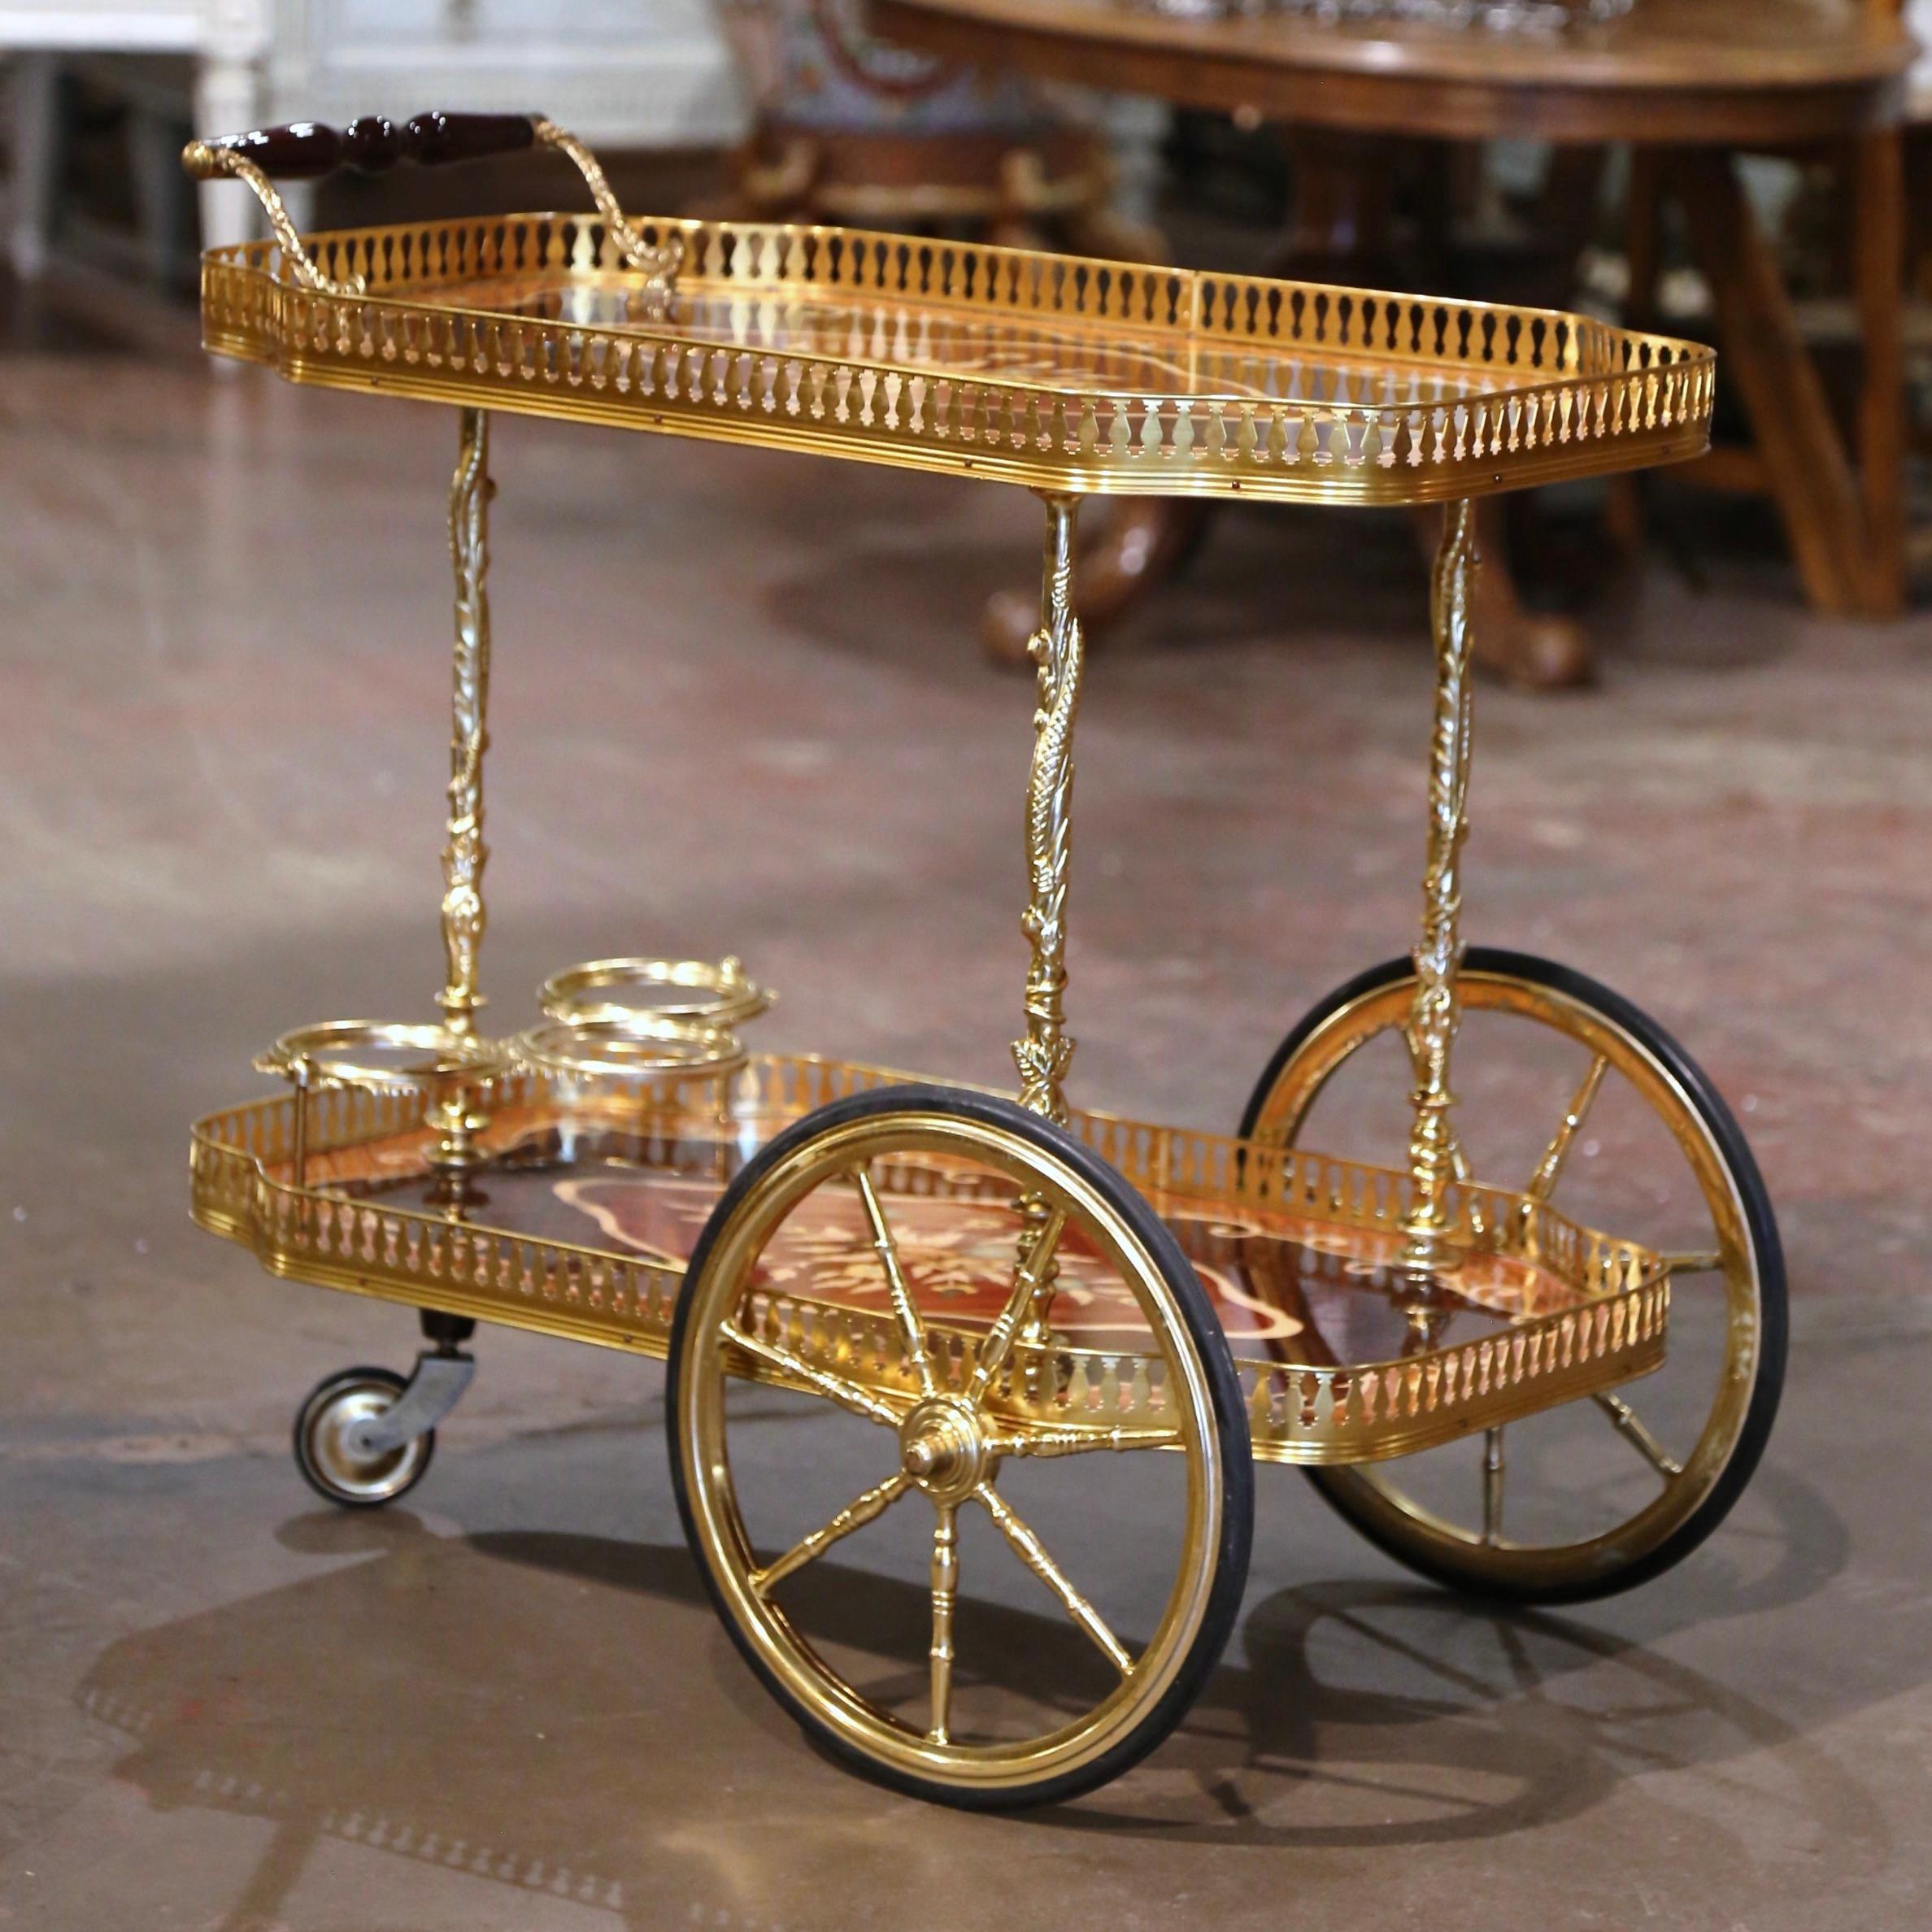 This elegant two-tier marquetry and gilt brass cart was created in Italy, circa 1980. Rectangular in shape with recessed corners, the bar cart sits on side spoked wheels over bamboo shaped legs embellished with foliage motifs. The trolley features a